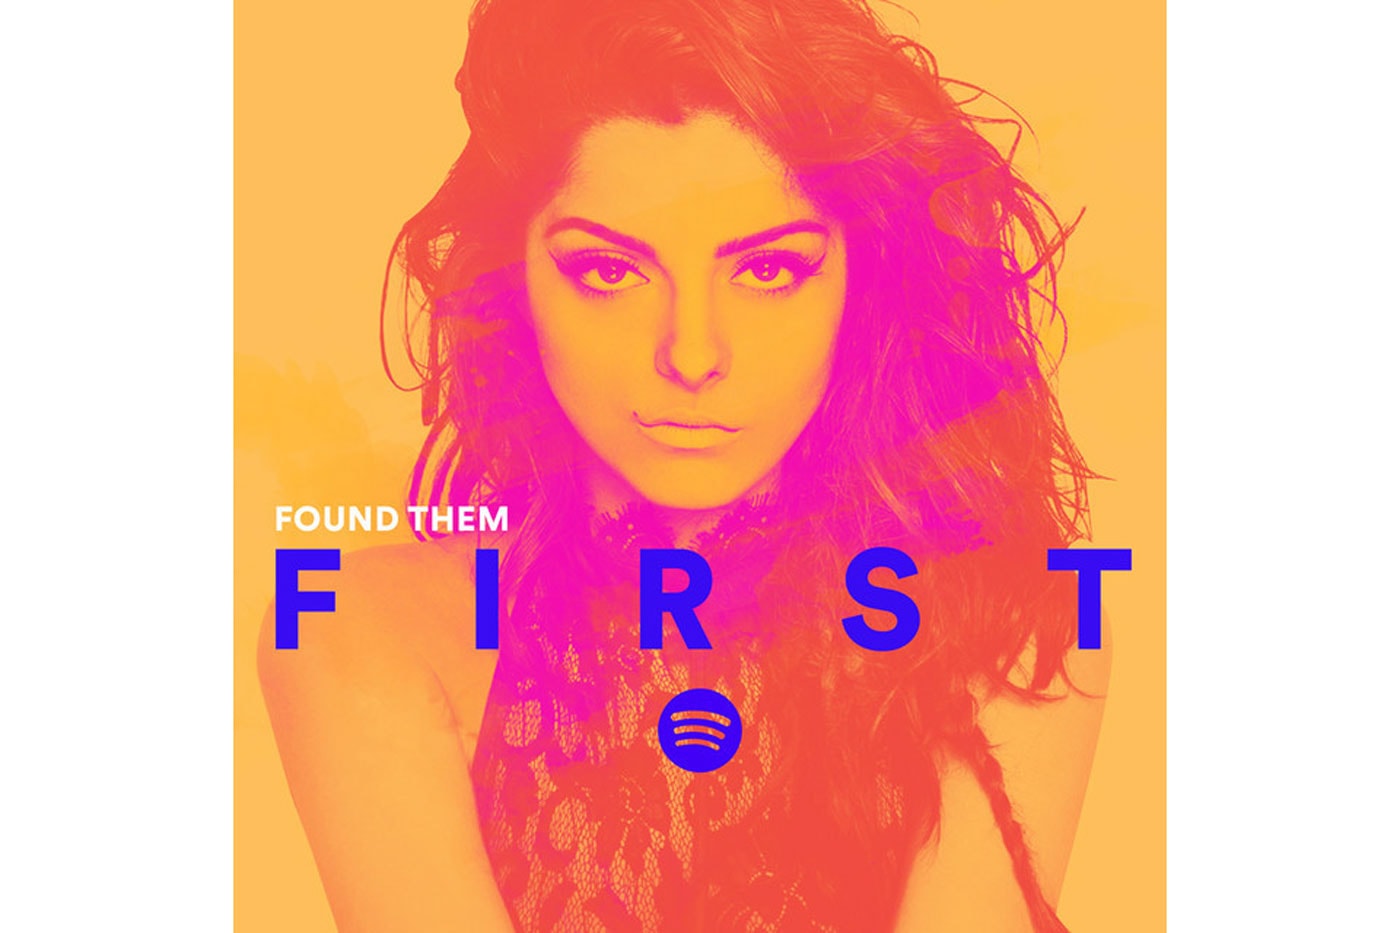 Spotify Introduces "Found Them First"